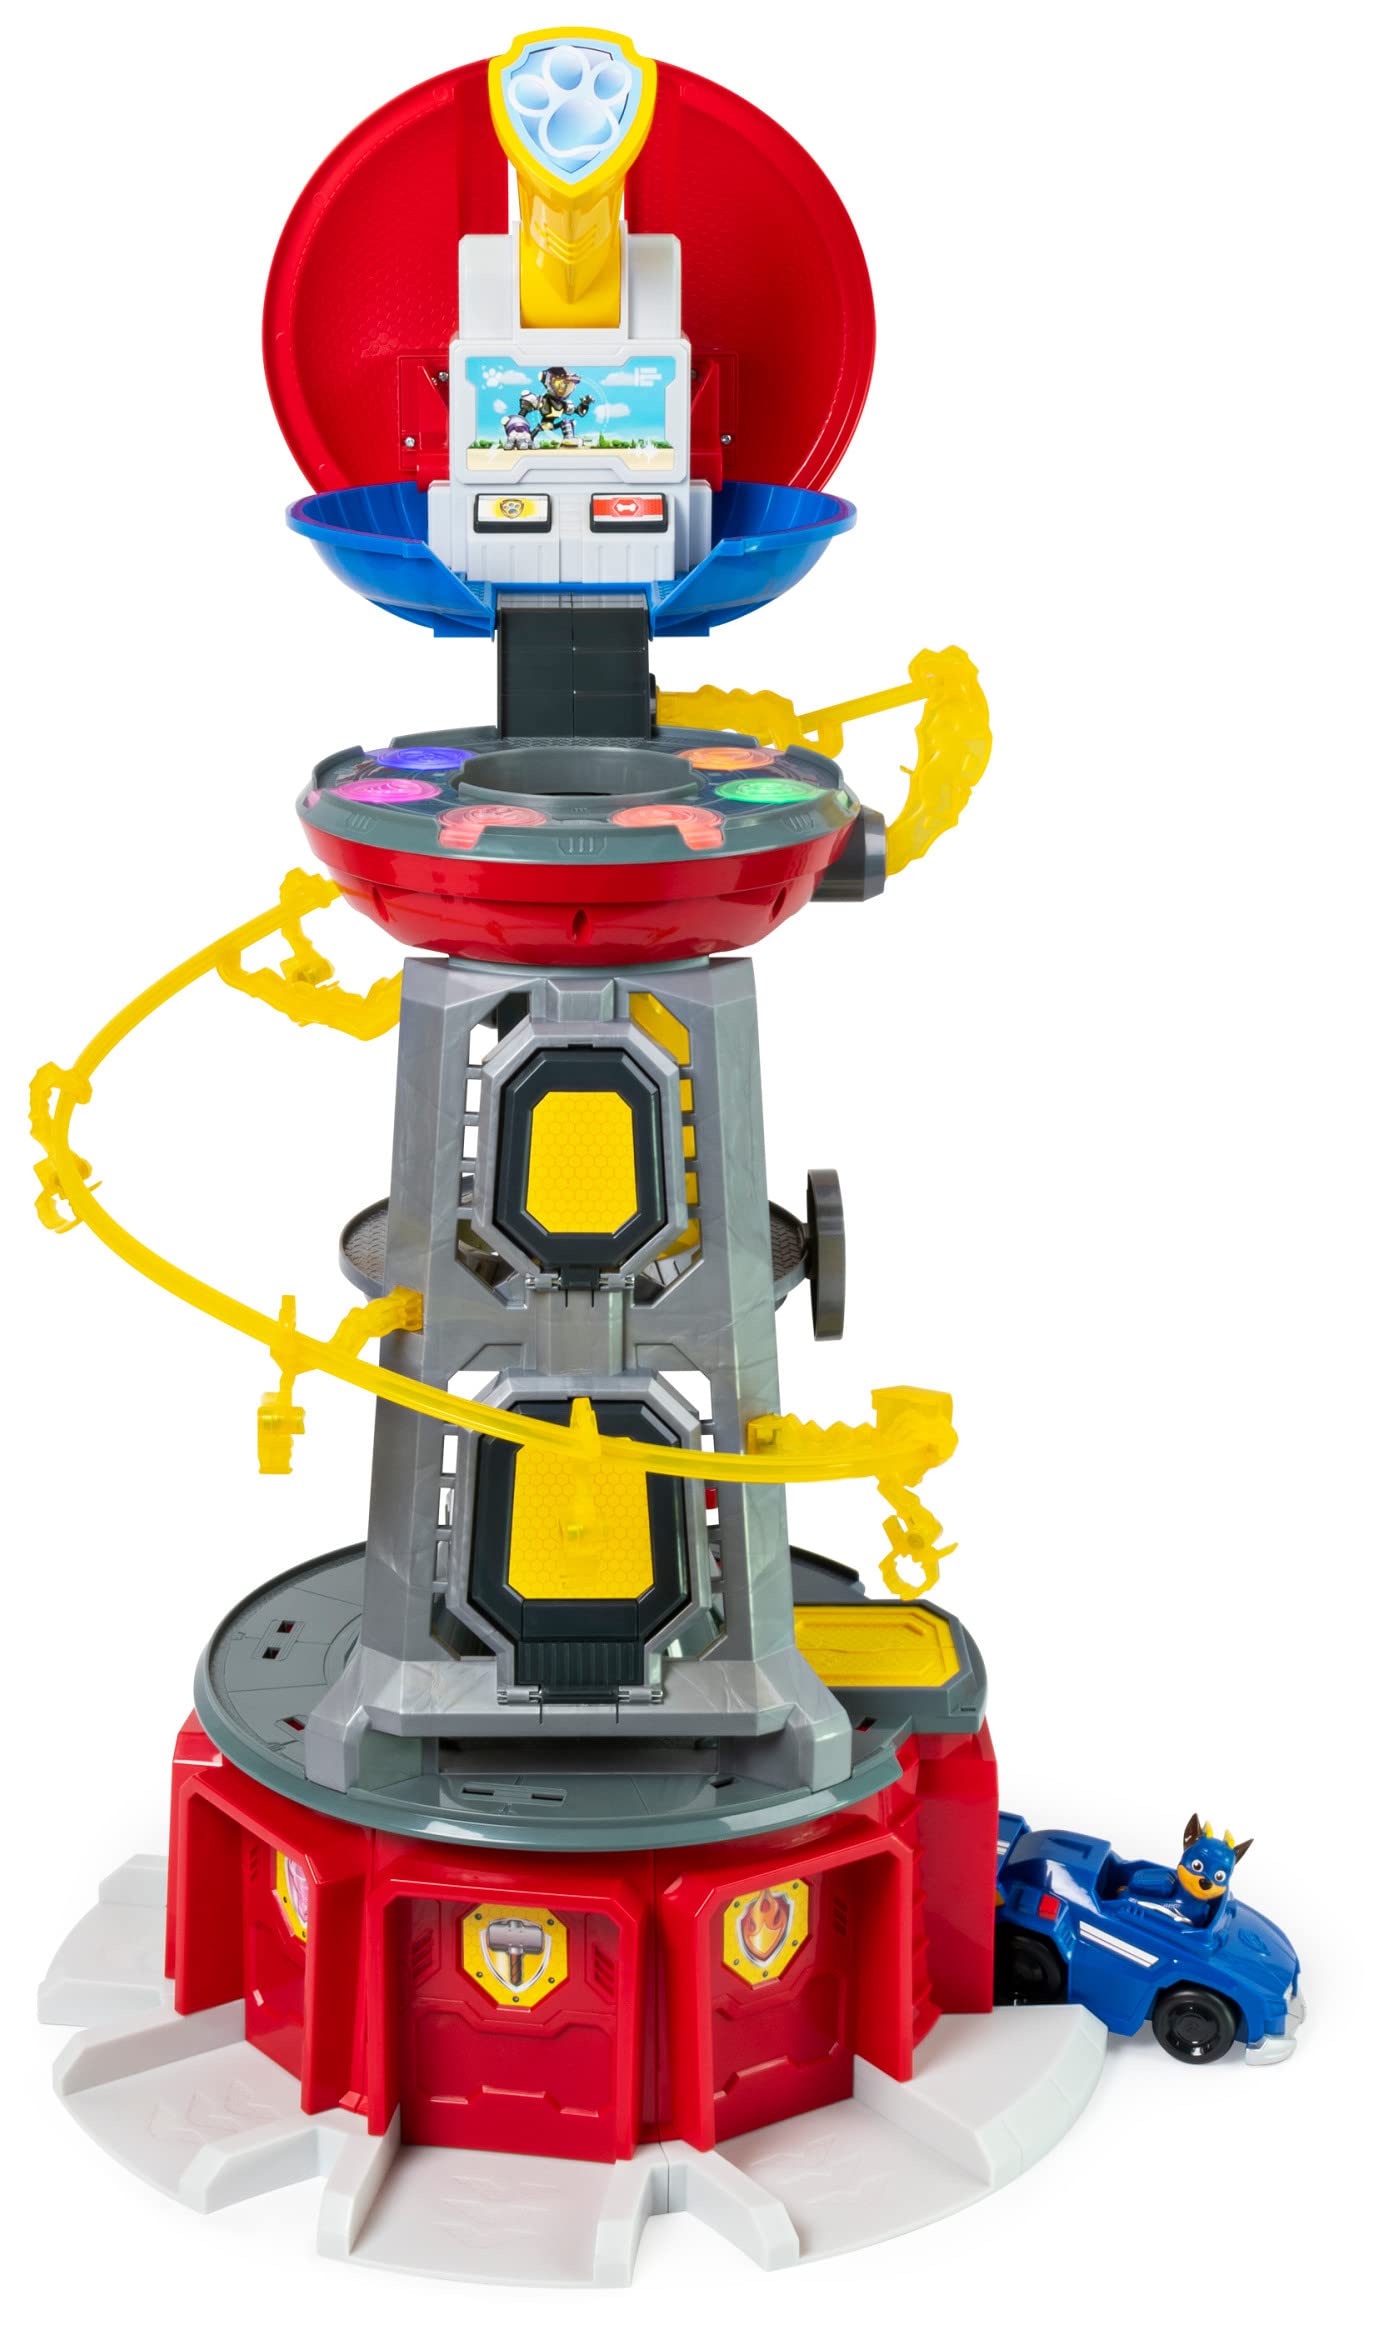 Cool Maker Paw Patrol, Mighty Pups Super Paws Lookout Tower Playset with Lights and Sounds, Toy for Ages 3 and Up